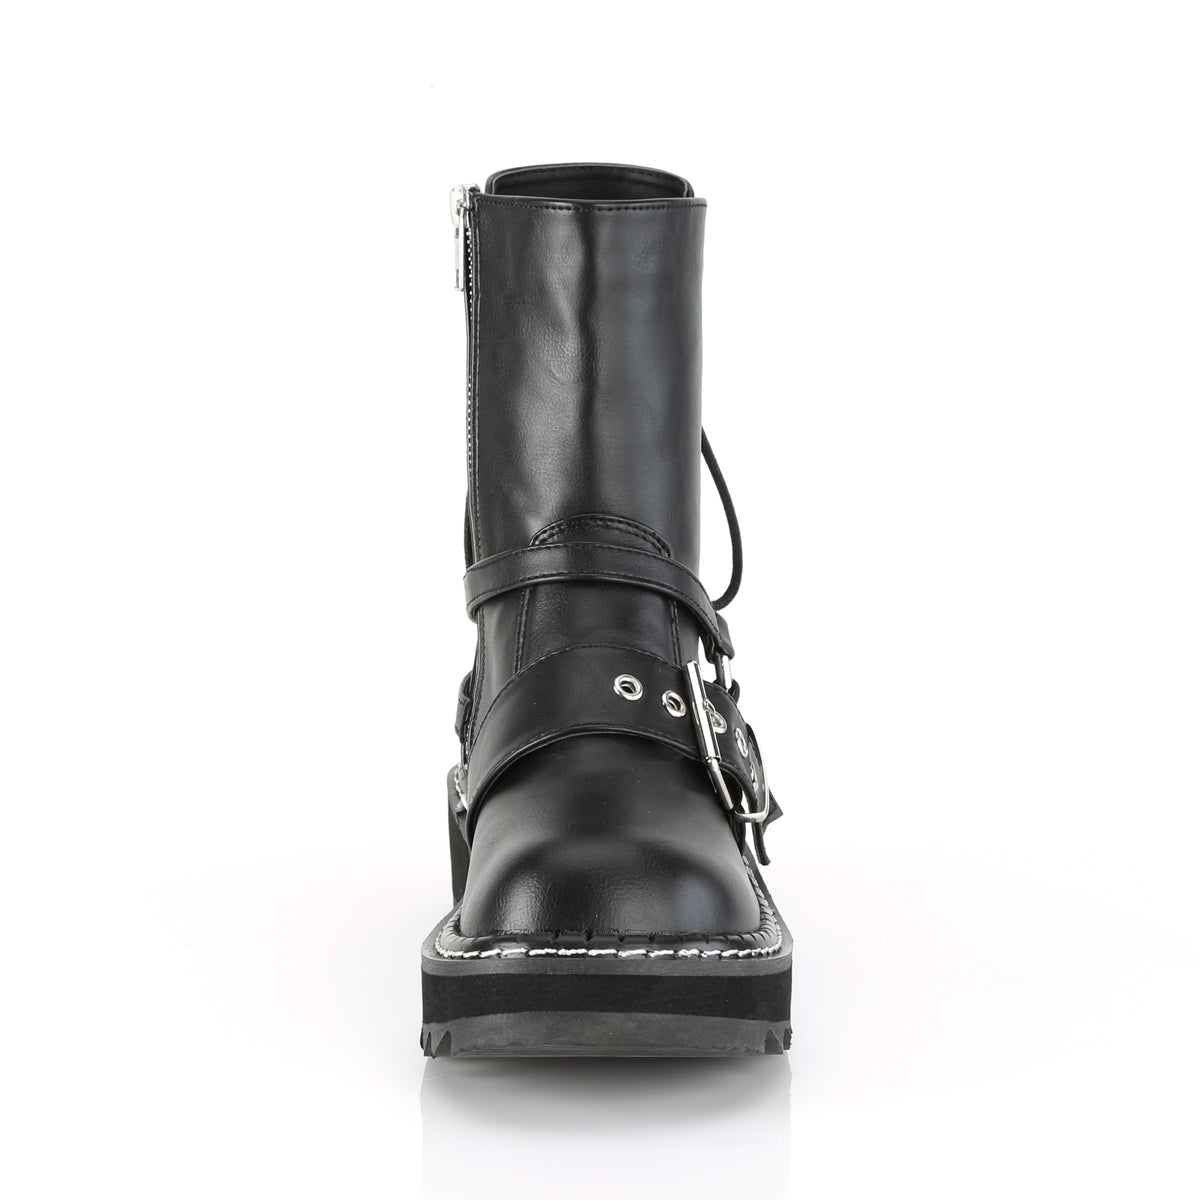 LILITH-210 Black Vegan Leather Ankle Boot Demonia